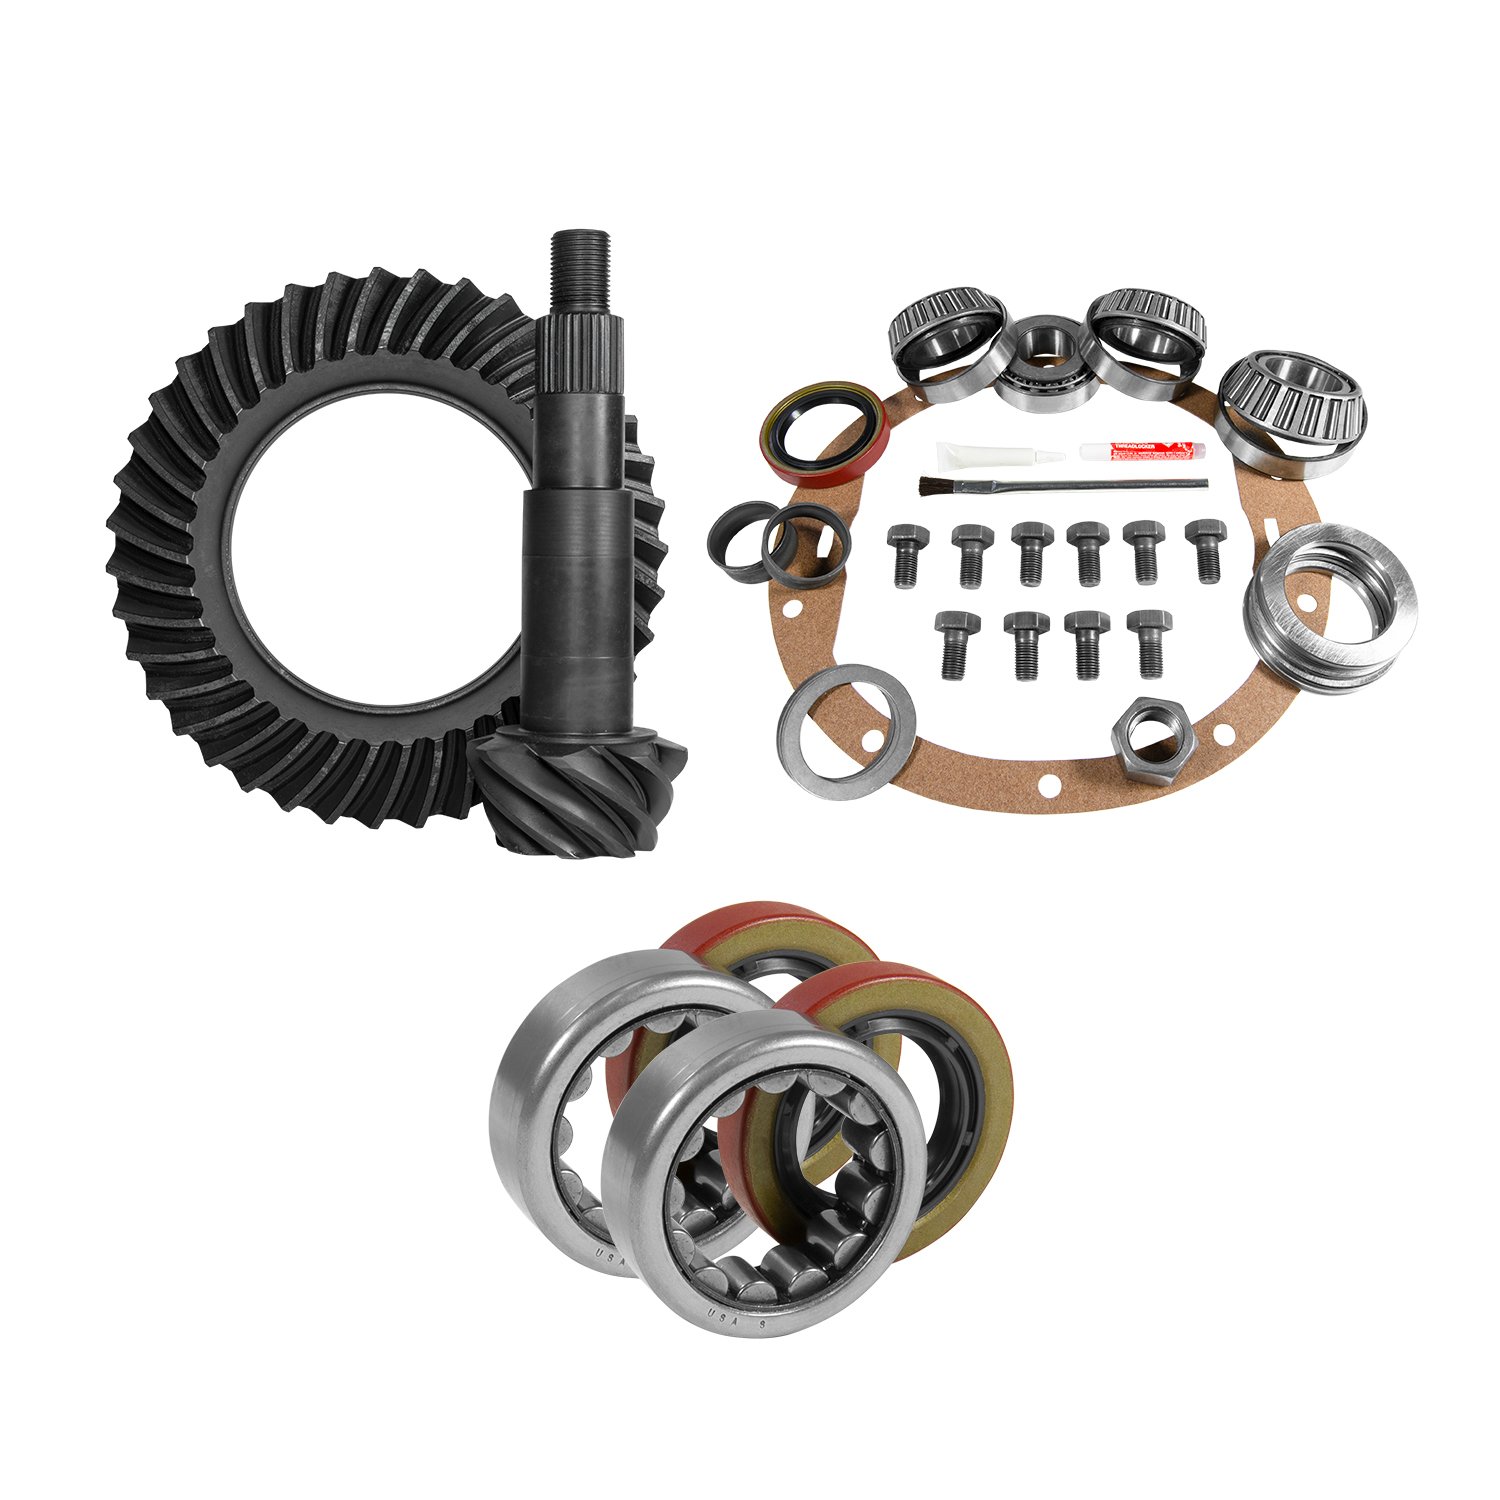 Muscle Car Re-Gear Kit For GM 8.5 in. Diff, 30 Spline, 4.11 Ratio